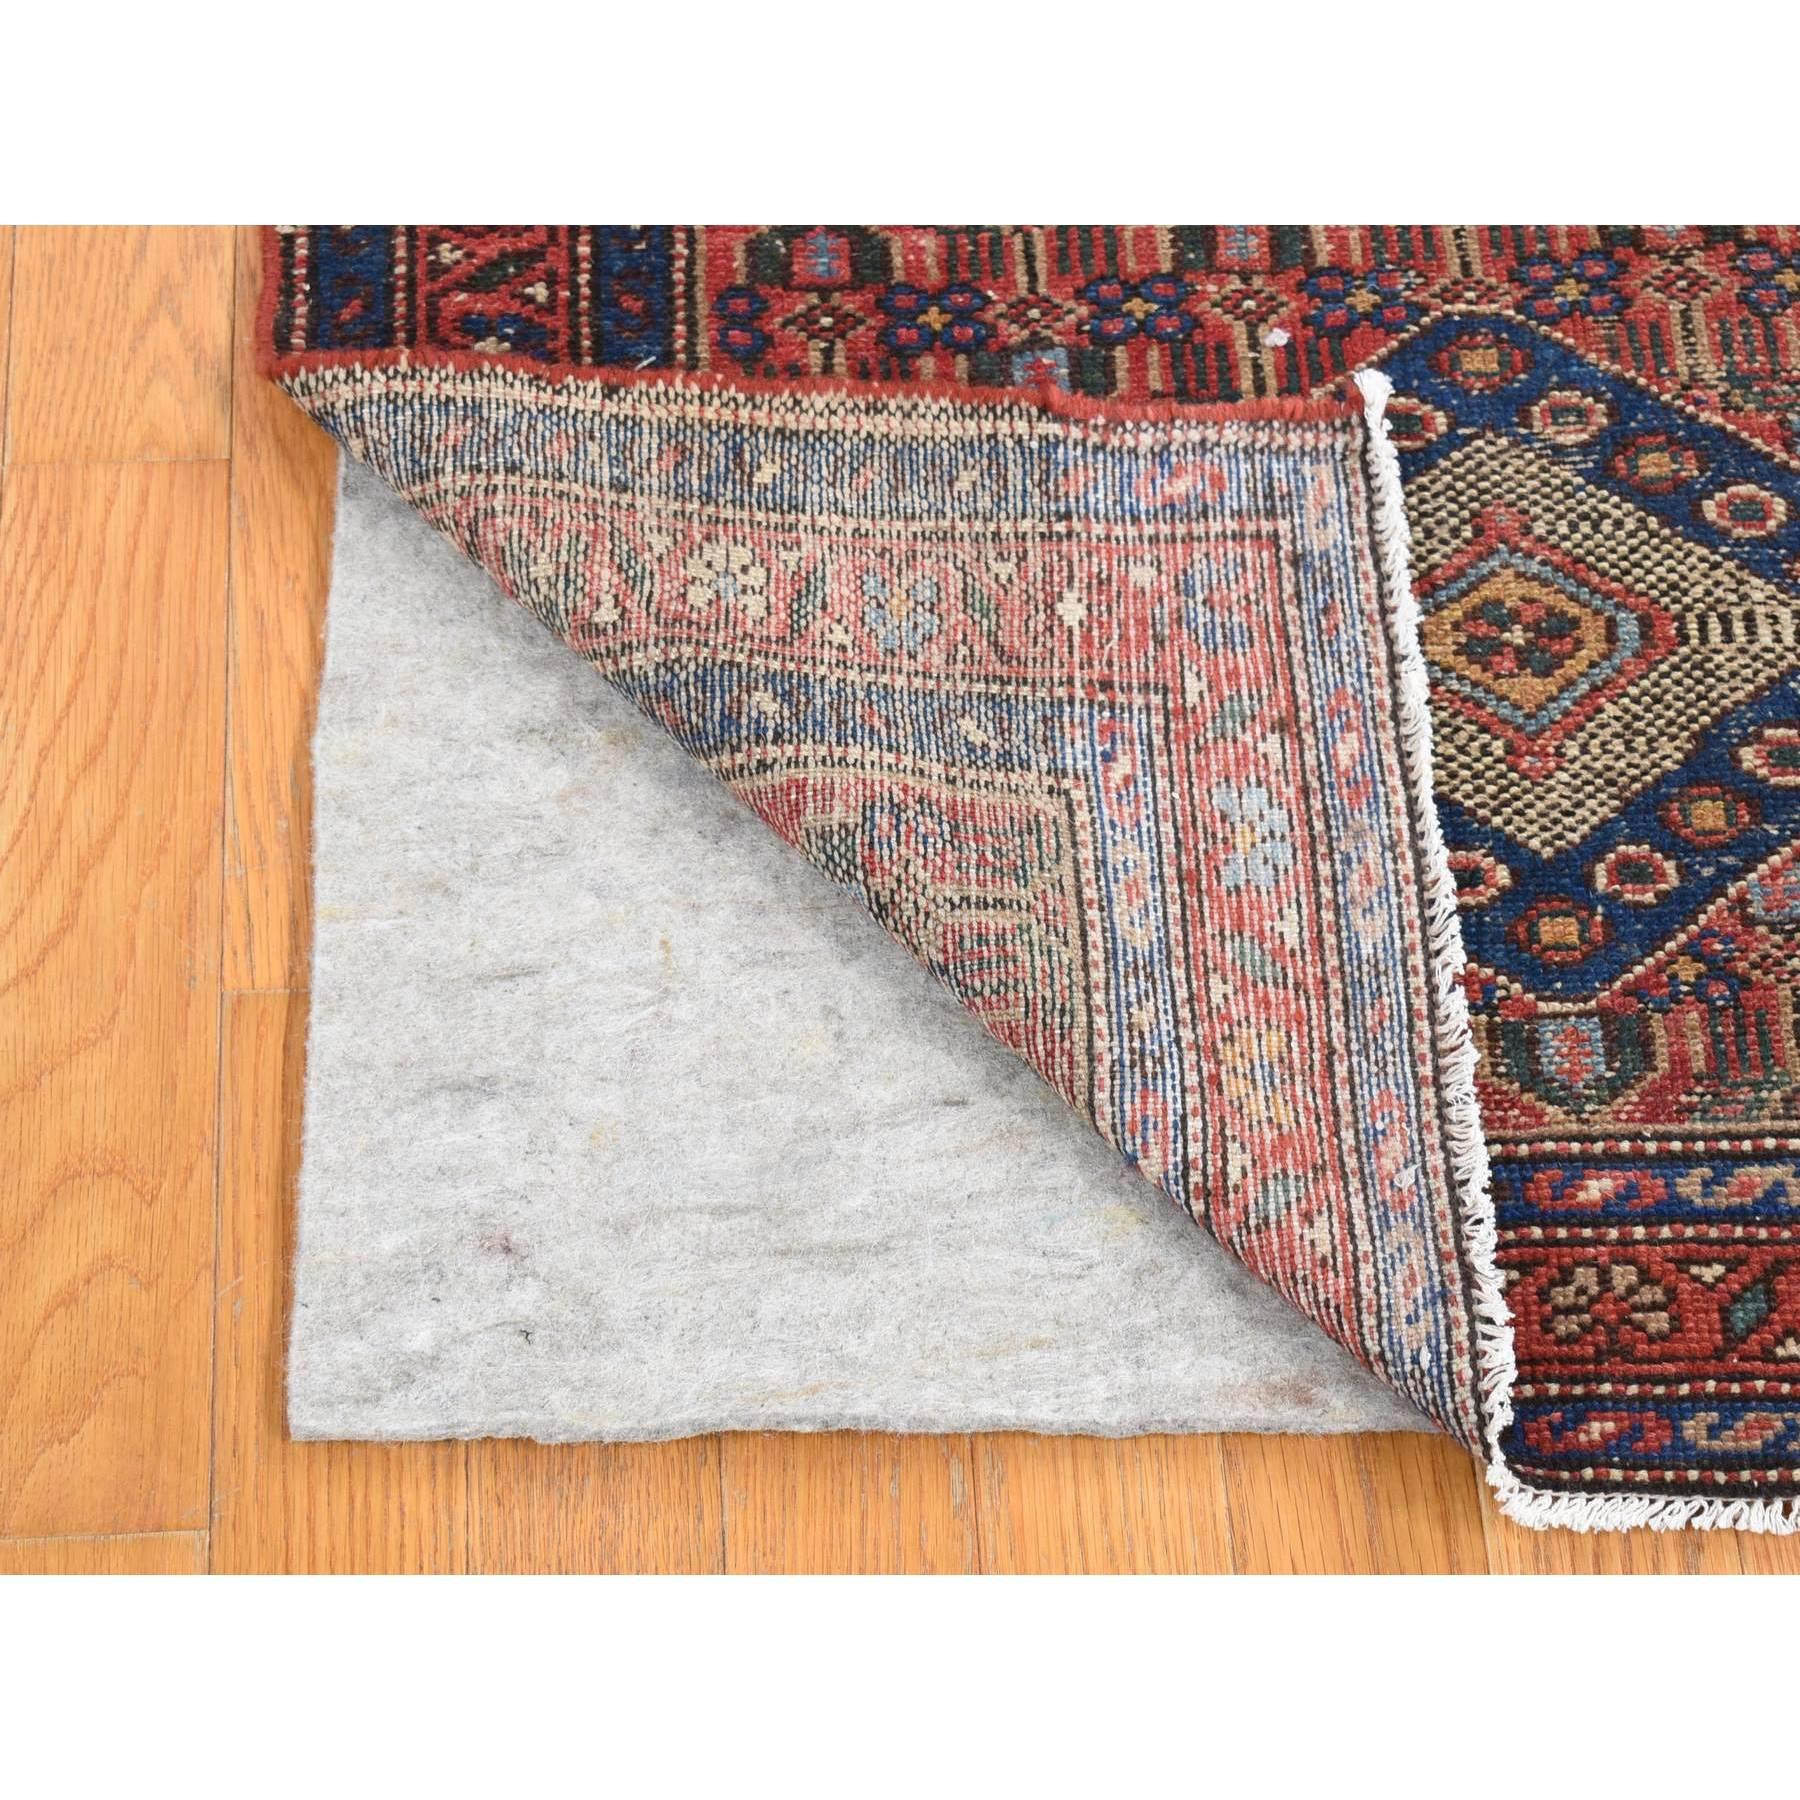 Medieval Terracotta Red Antique Persian Hamadan Soft Wool Hand Knotted Clean Runner Rug